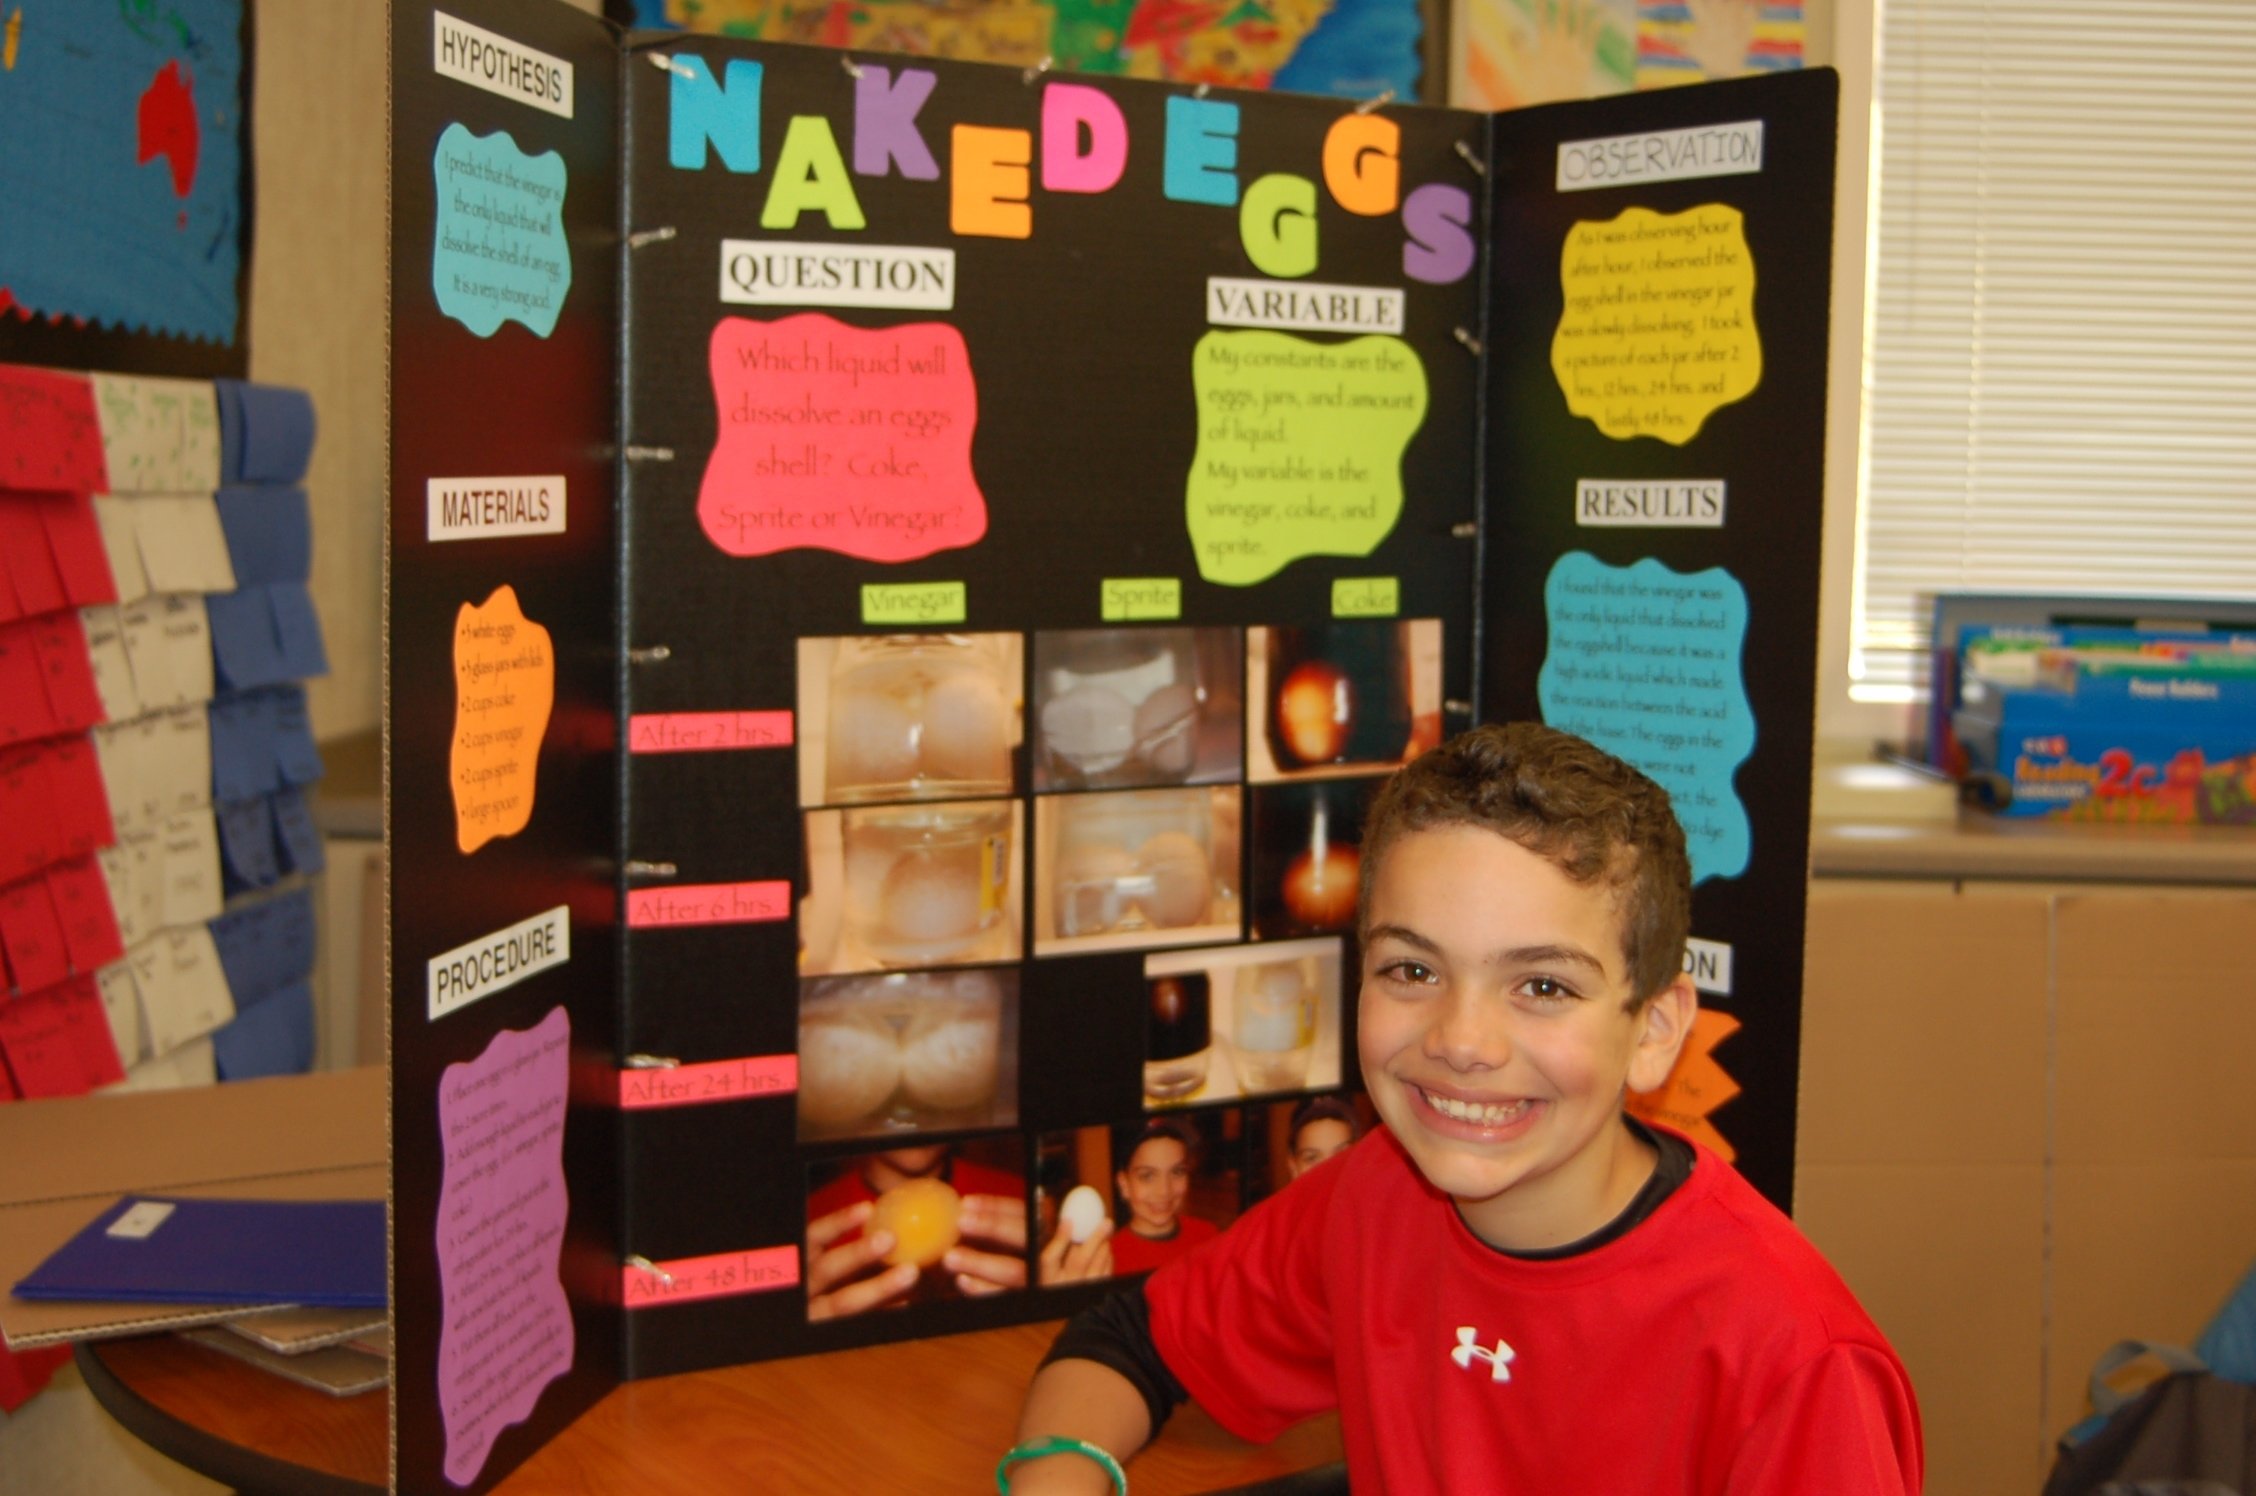 10 Unique Amazing Science Fair Project Ideas green elementary school science fair inspires student scientists 5 2022